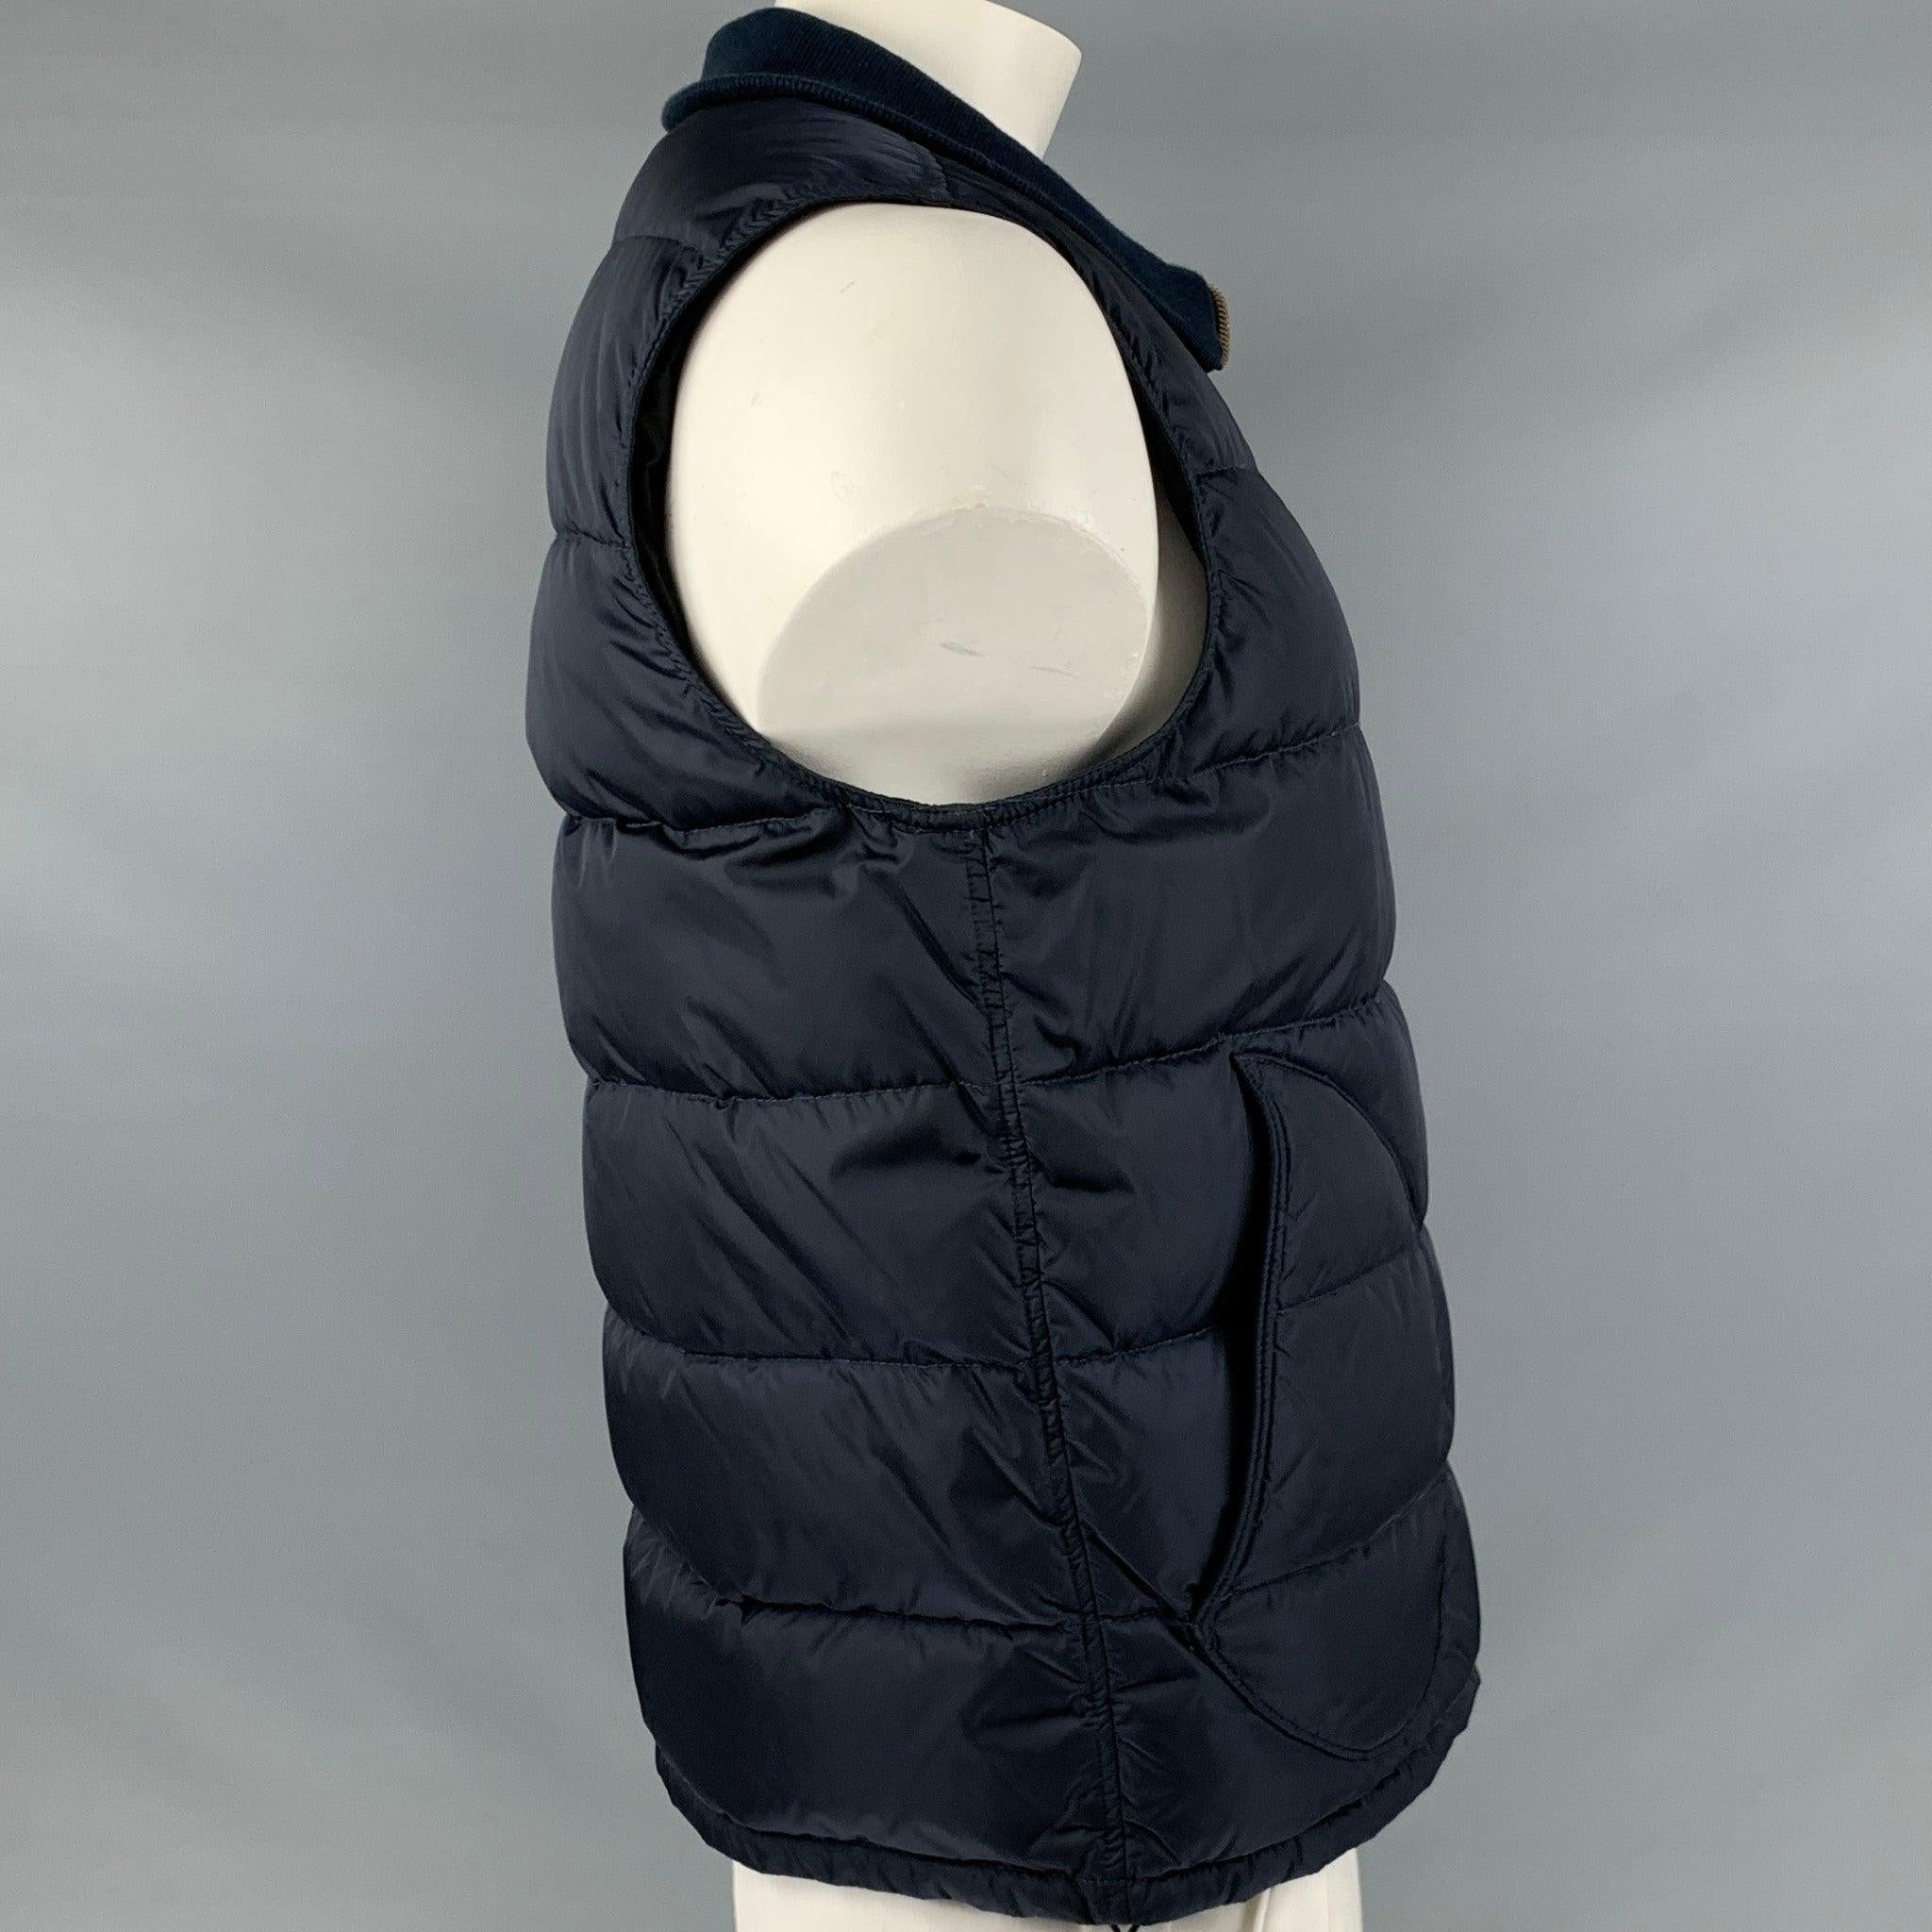 PAUL SMITH vest in a navy nylon fabric featuring a quilted style, two pockets, and zip up closure.Excellent Pre-Owned Condition. 

Marked:   XL 

Measurements: 
 
Shoulder: 16 inches Chest: 44 inches Length: 25.5 inches 
  
  
 
Reference: